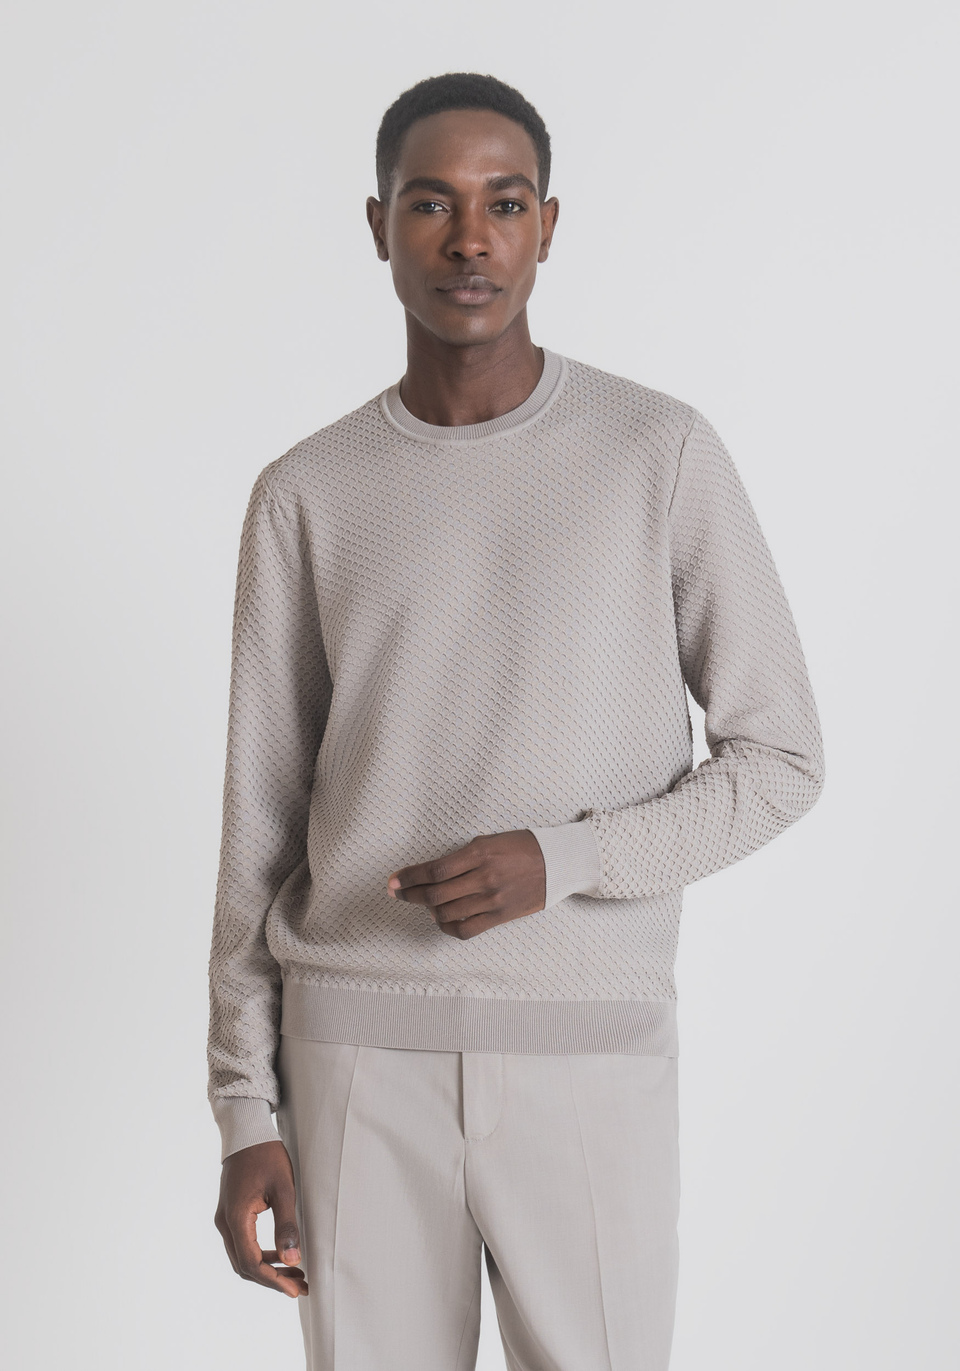 SLIM-FIT SWEATER IN VISCOSE-BLEND YARN WITH HONEYCOMB KNIT - Antony Morato Online Shop